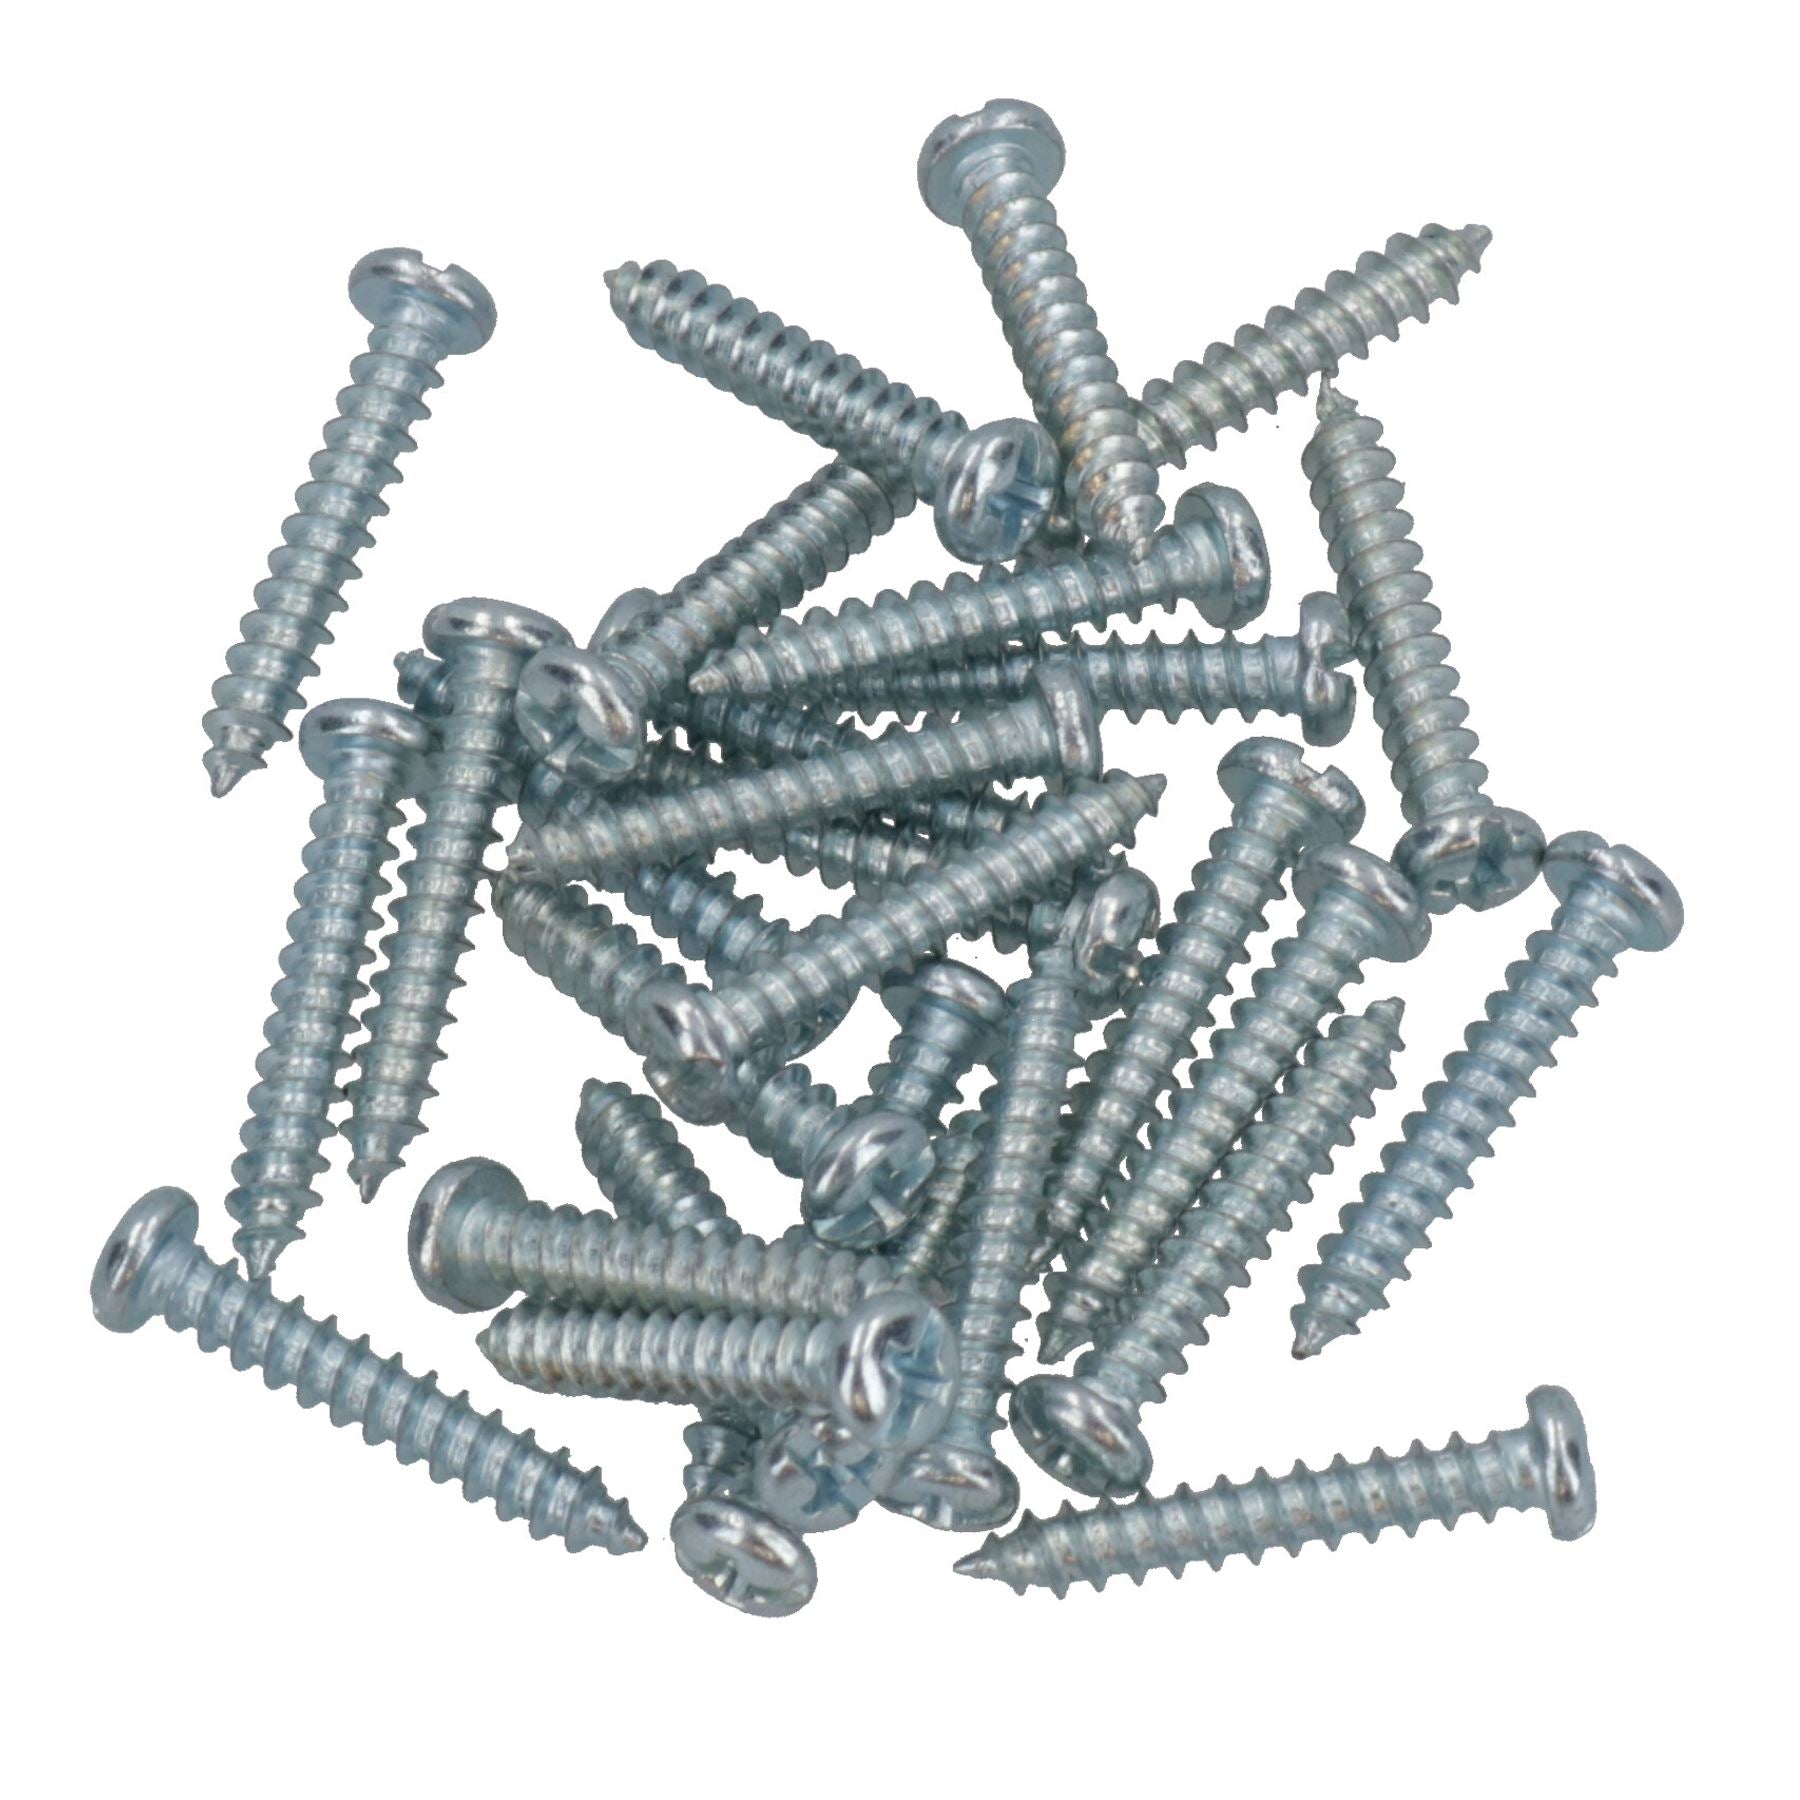 Self Tapping Screws PH2 Drive 4mm (width) x 25mm (length) Fasteners